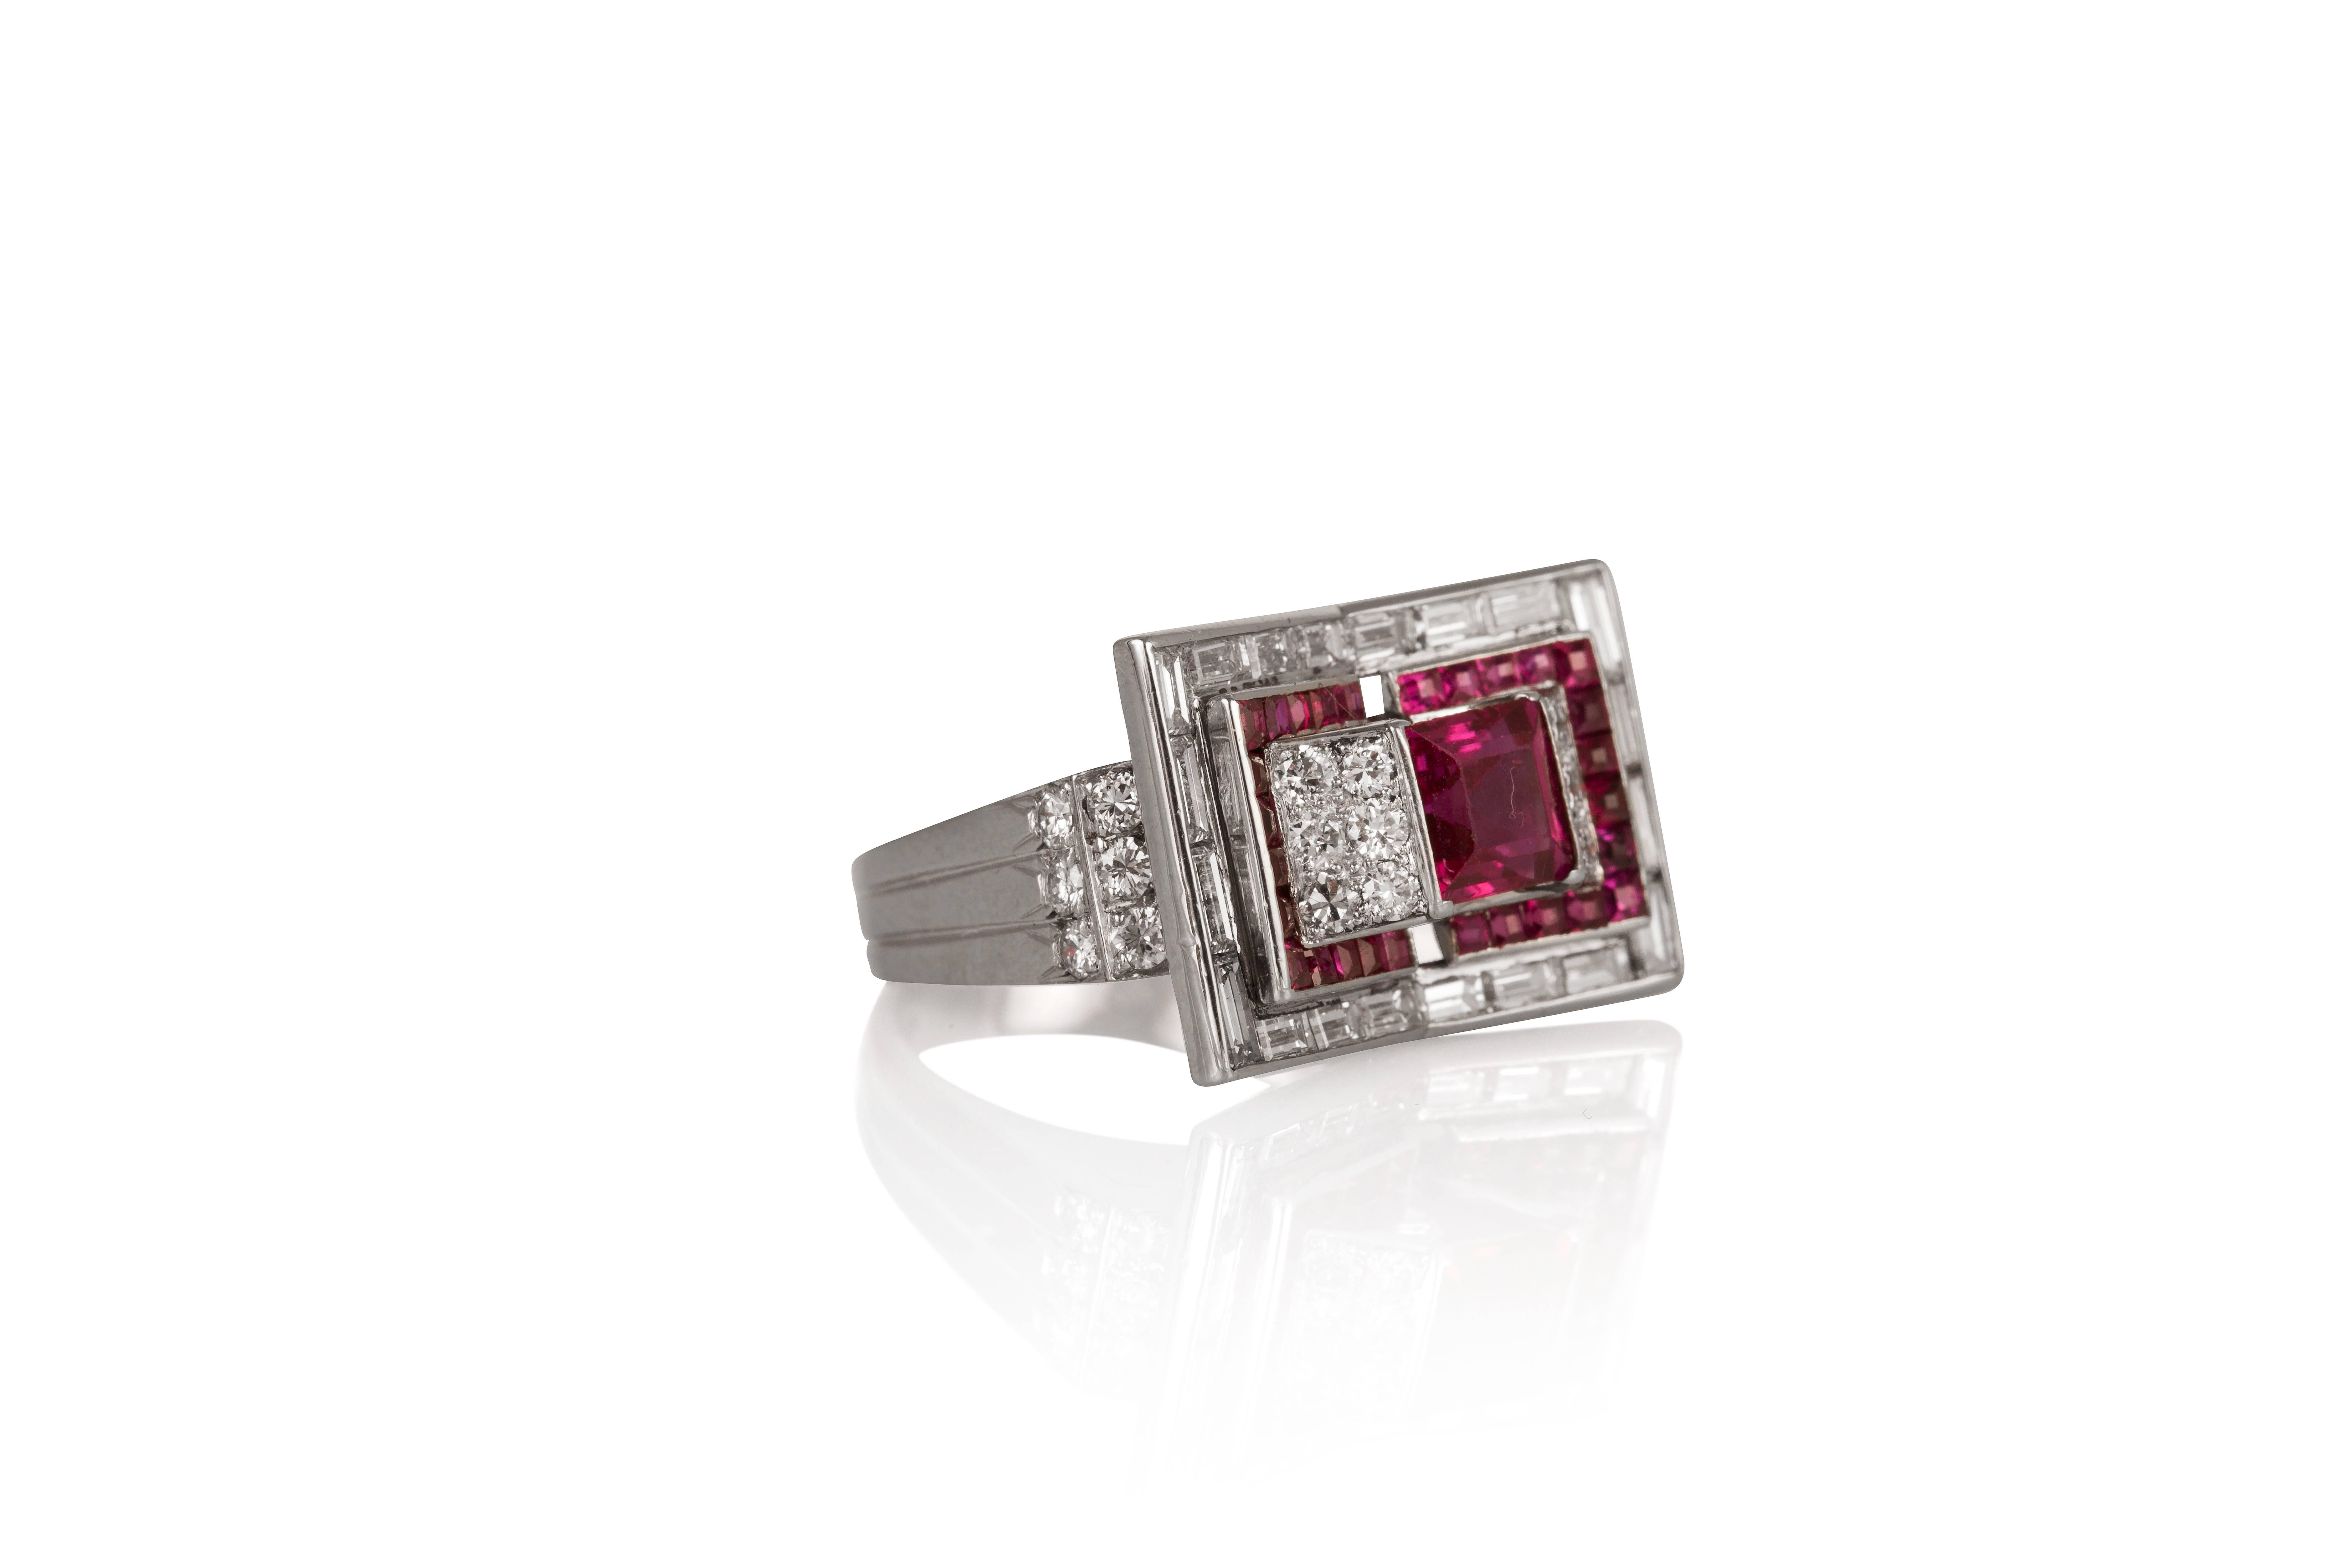 Centered on a square ruby weighing an estimated 1.20 carats, this geometric design ring also incorporates baguette and round diamonds and calibré cut rubies, mounted in platinum
Ring Size: 6

CREDENTIALS
•	American Gemological Laboratories